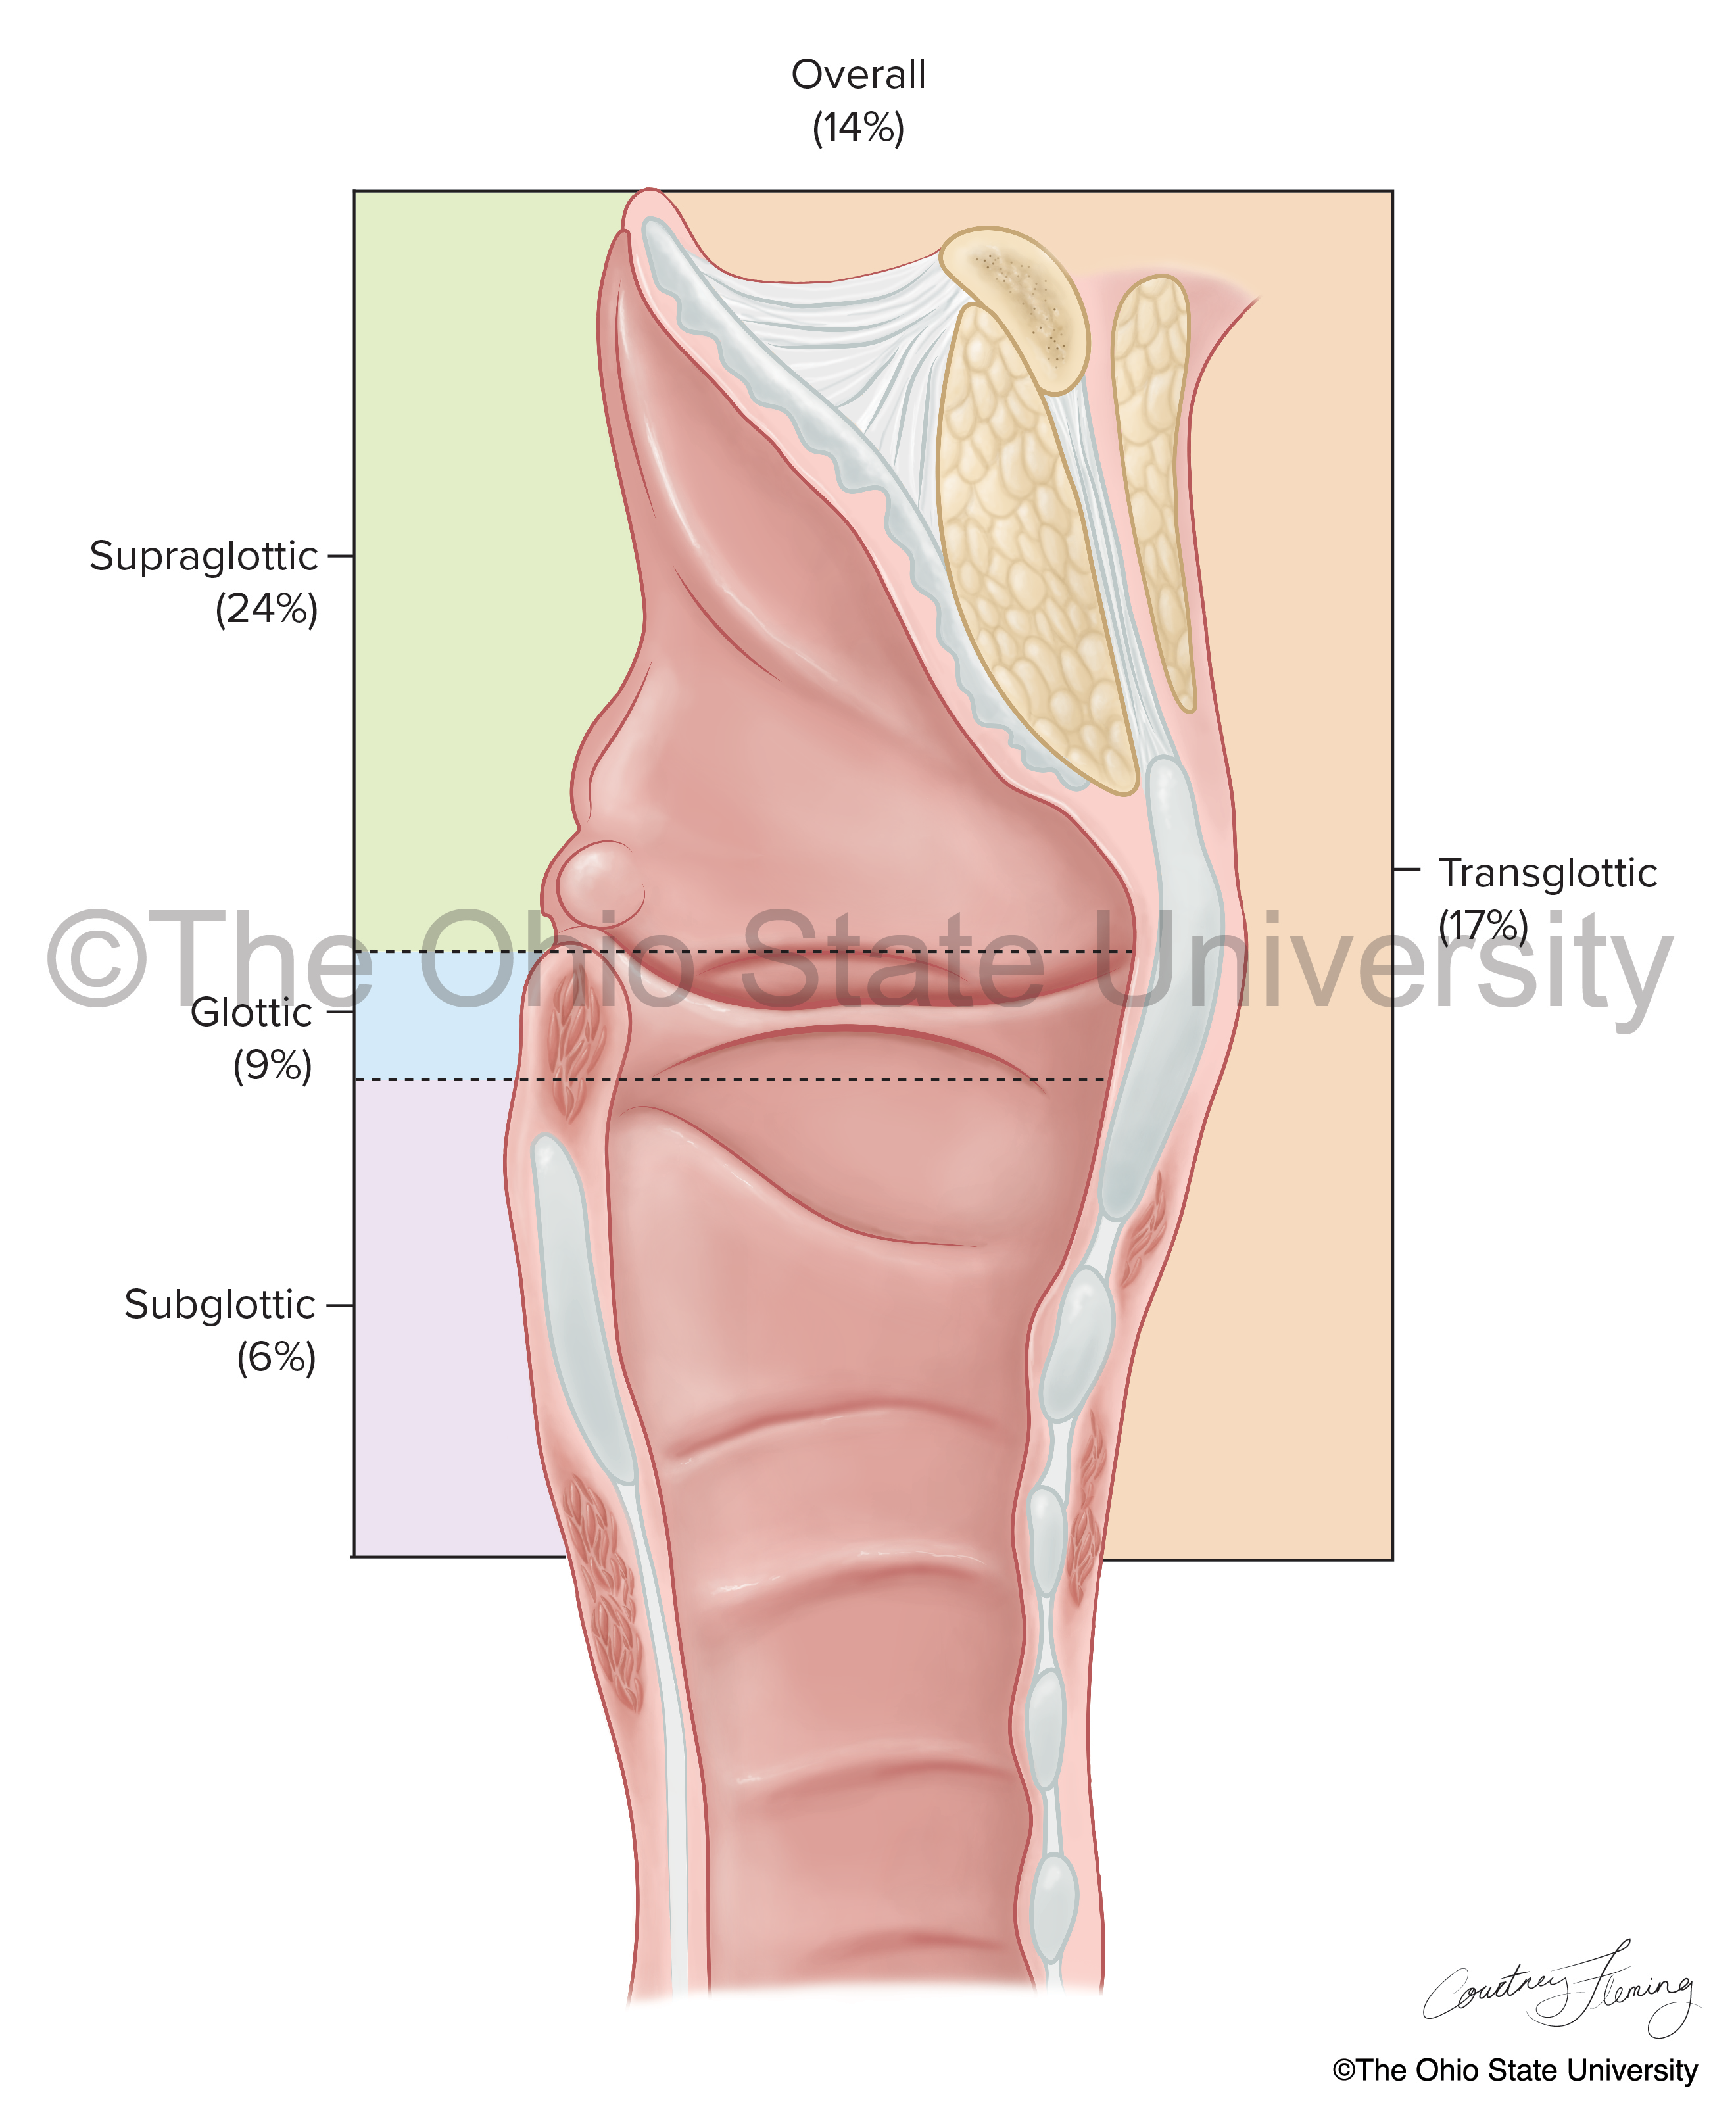 Moderate color journal illustration, showing sagittal cross-section of larynx